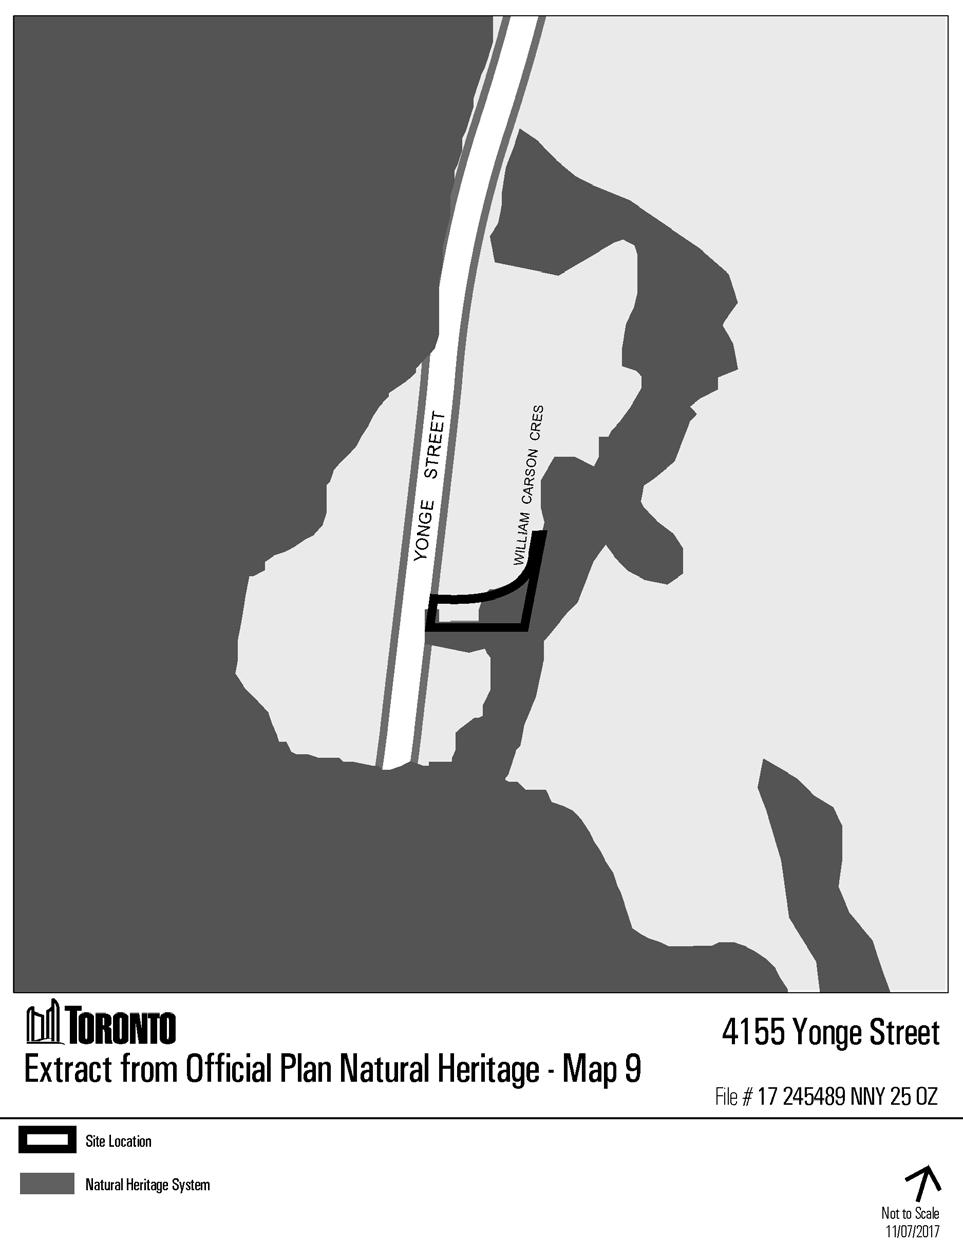 Attachment 4a: Official Plan Natural Heritage System Overlay